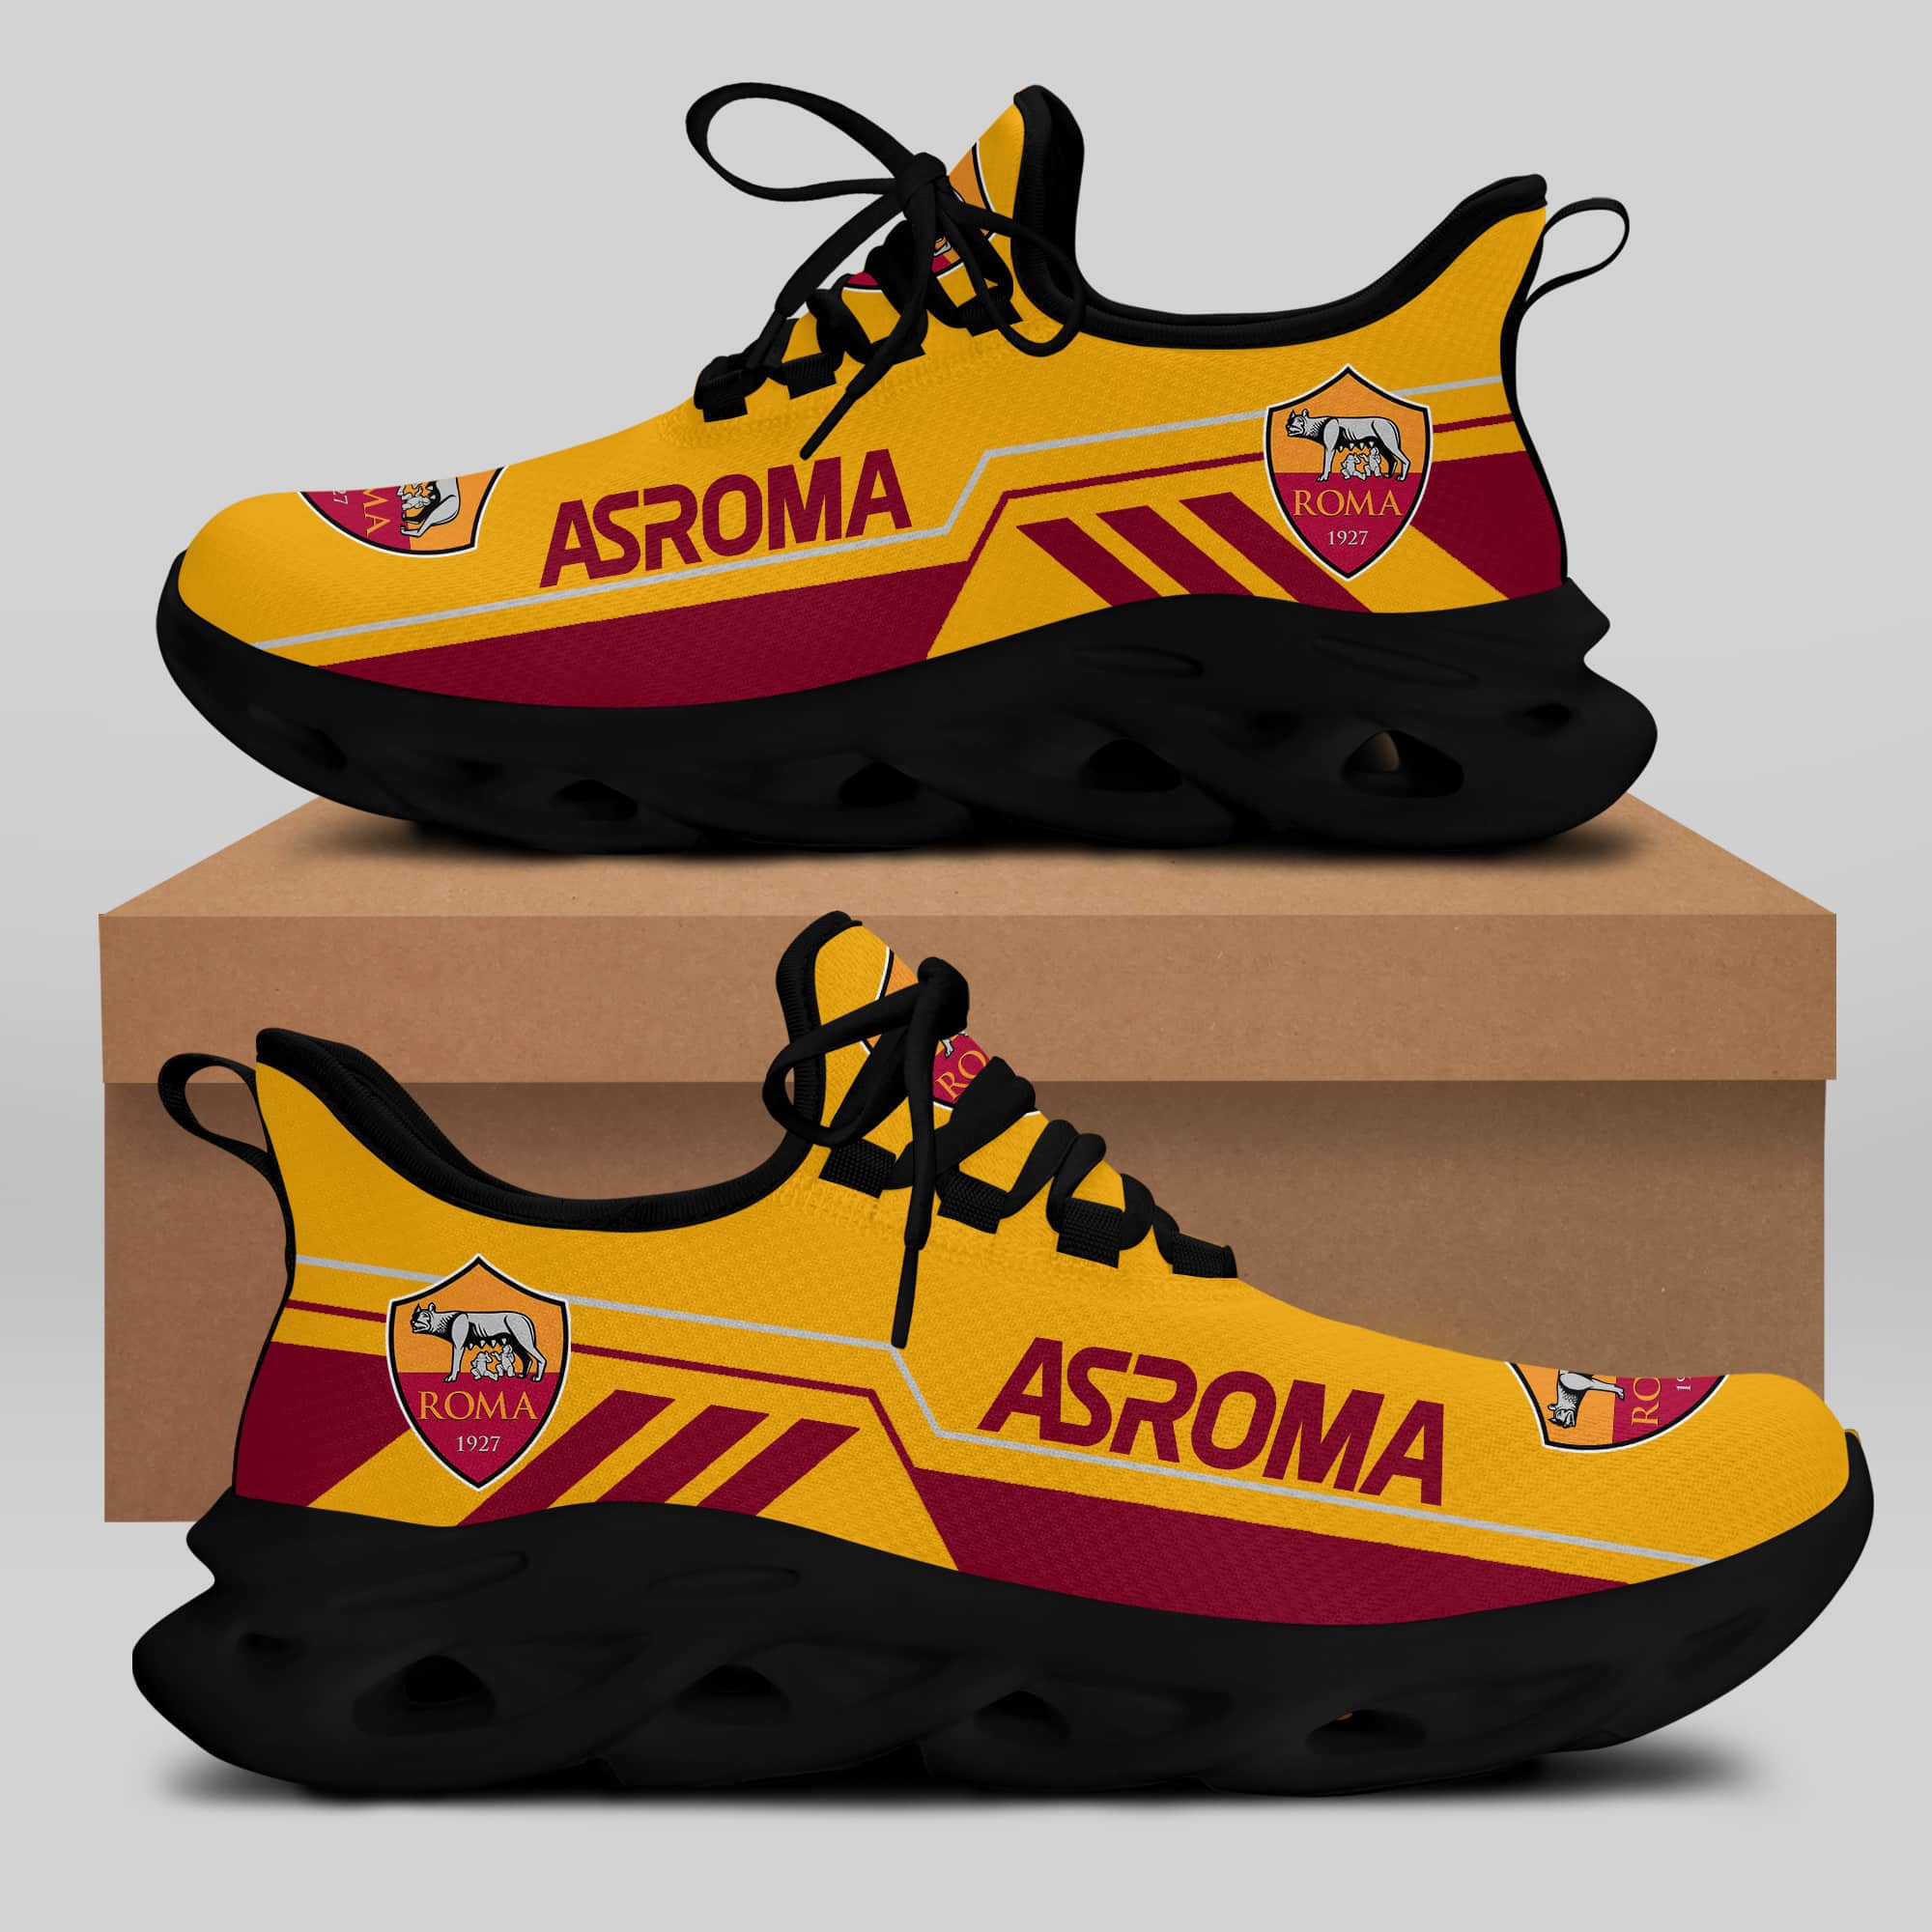 As Roma Running Shoes Max Soul Shoes Sneakers Ver 8 1